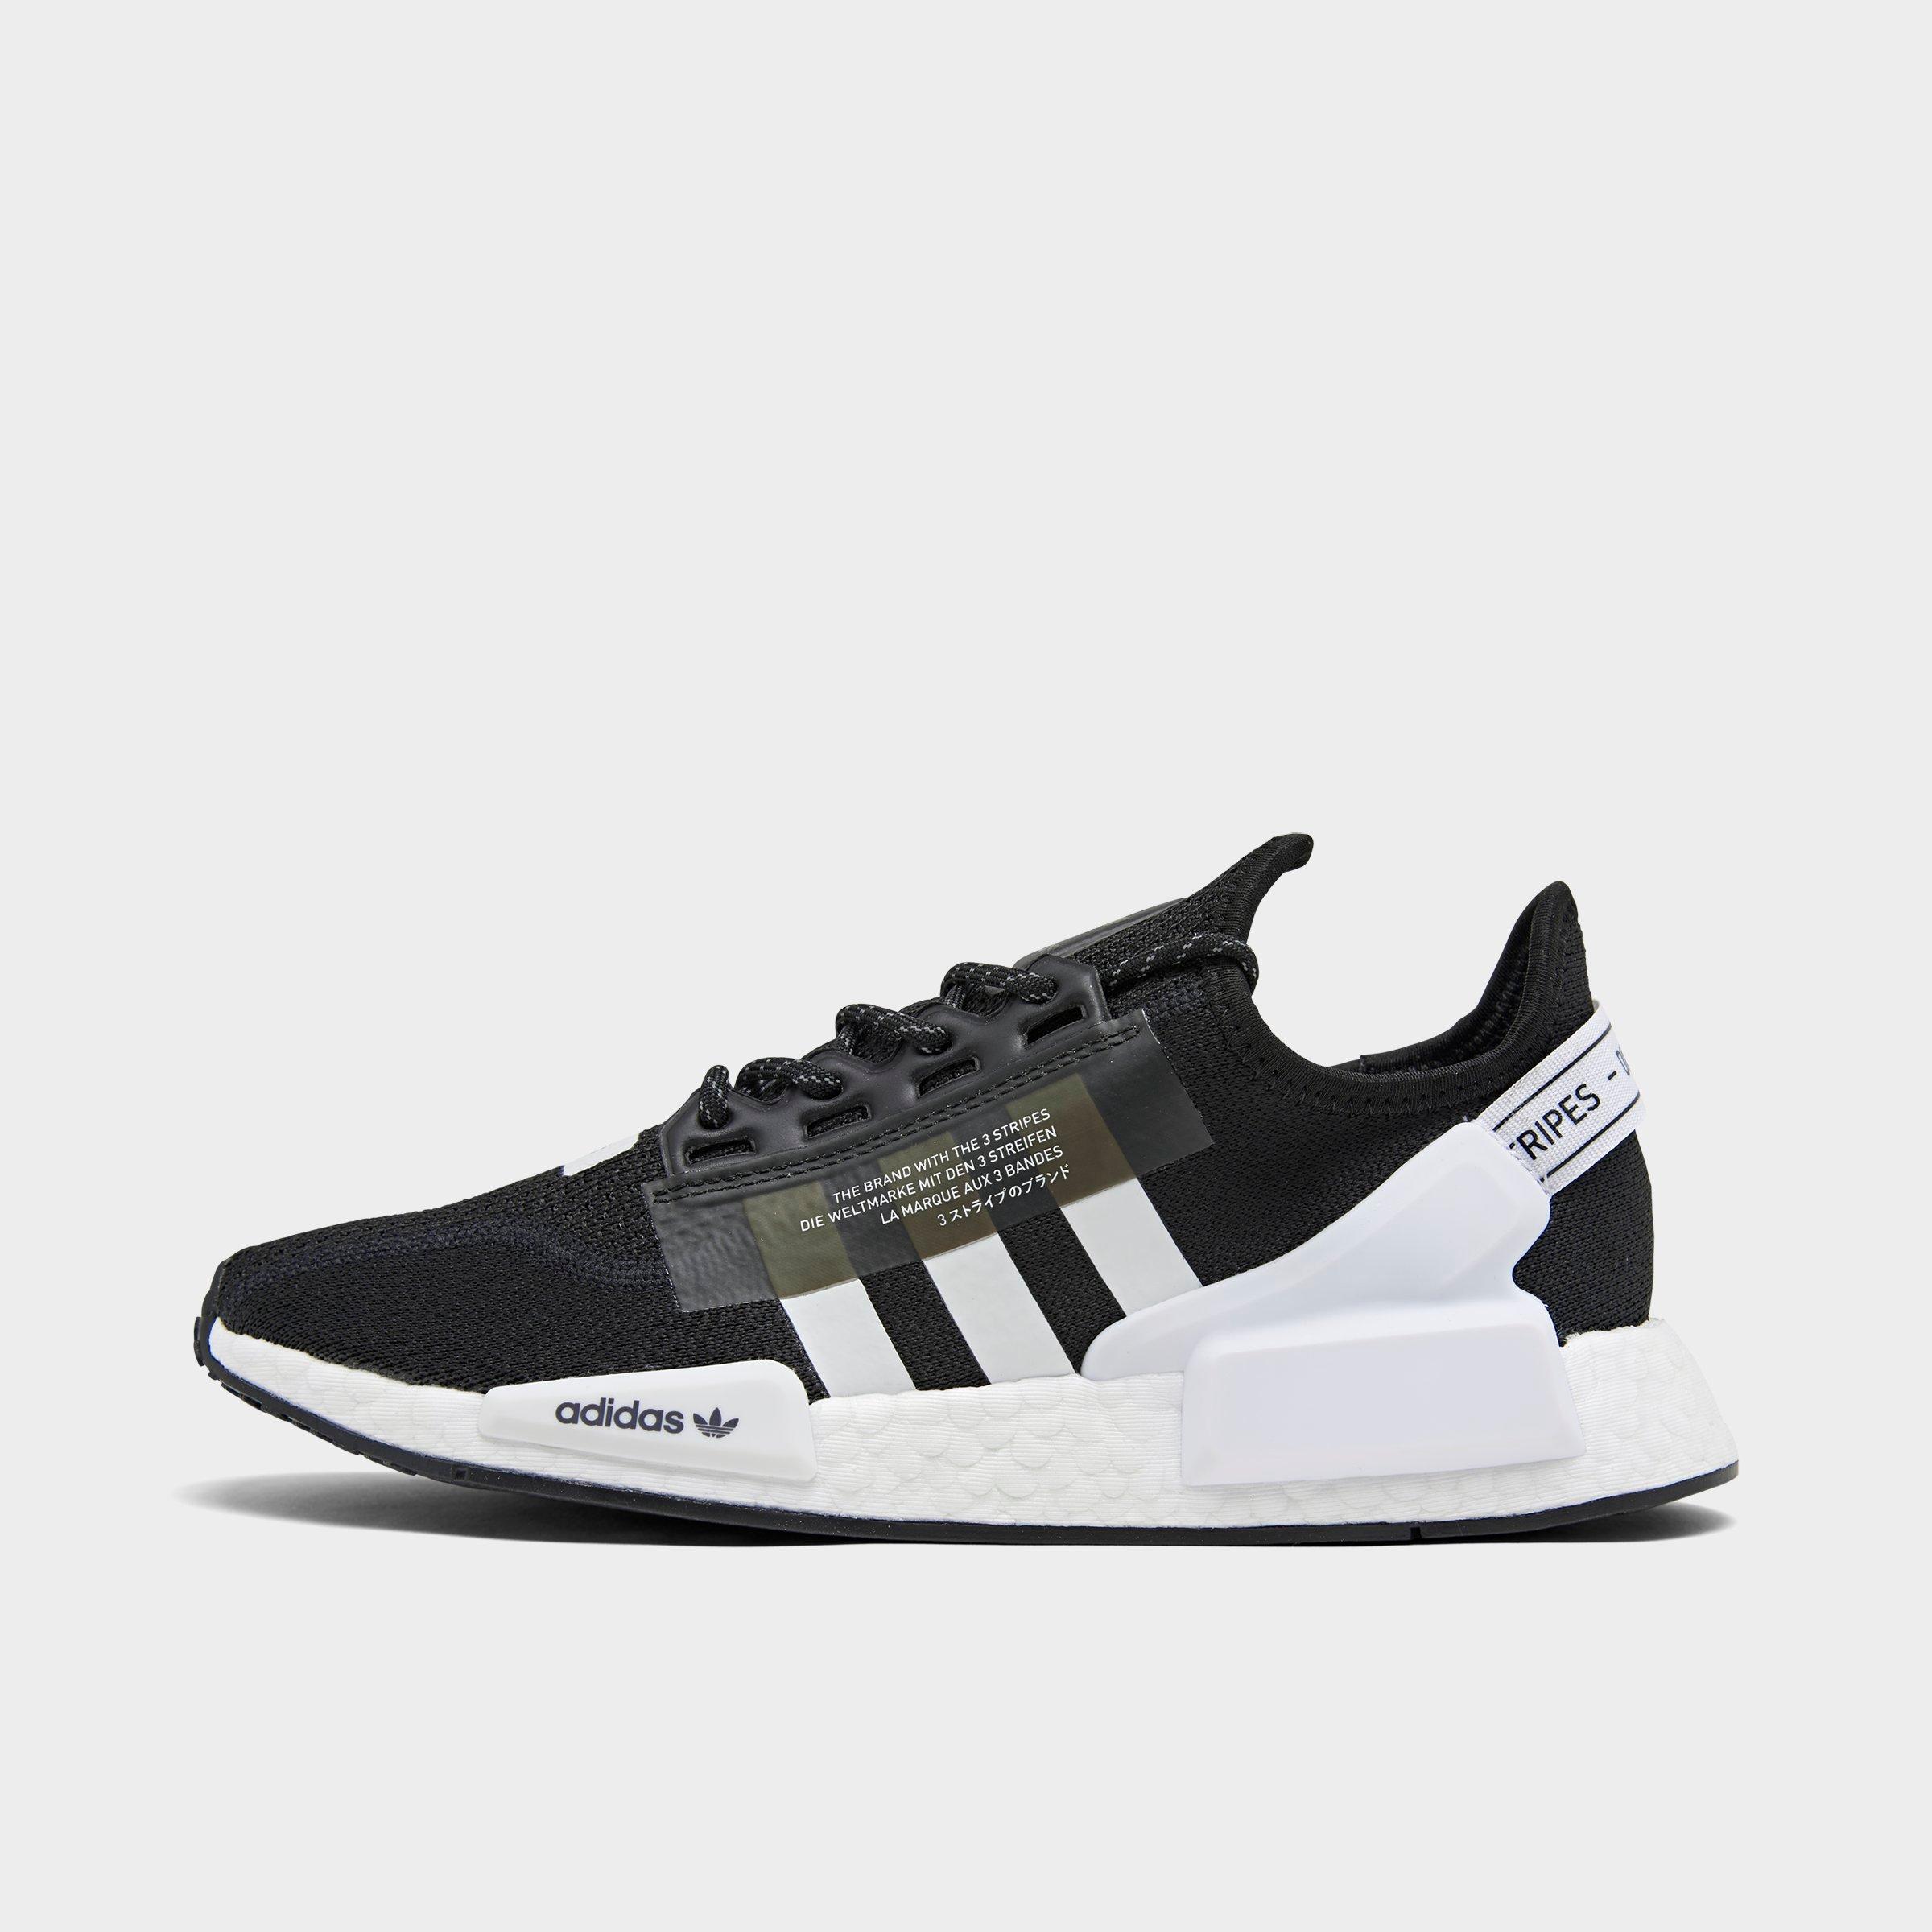 $ 750 RUNNING SHOE Adidas NMD R1 AND 2017